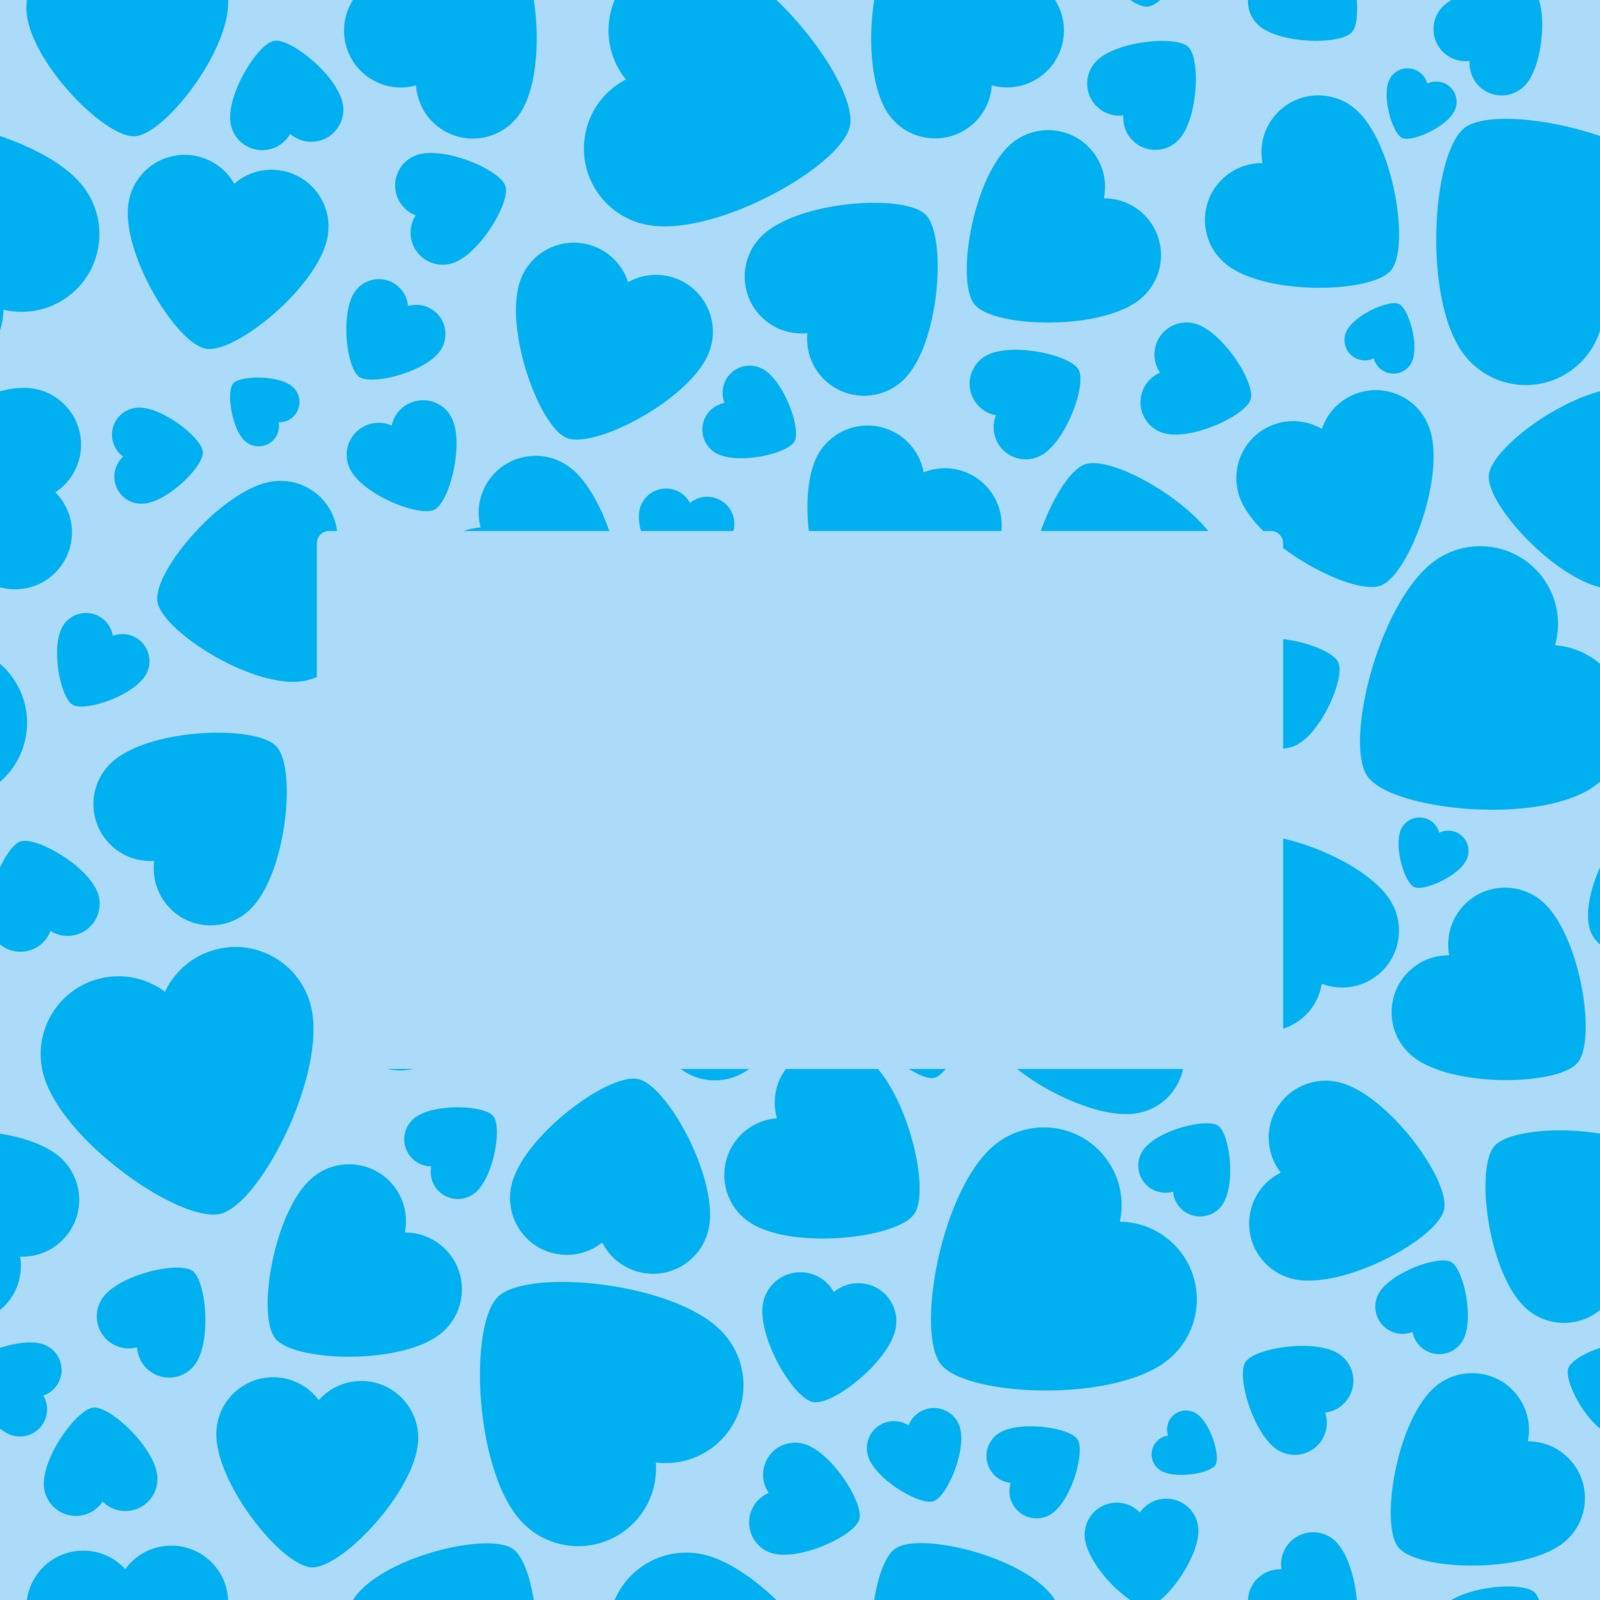 Frame With Blue Heart On Blue Background. Graphic Design In The Concept of Love. Love Symbol And Emblem for Valentines Day, Wedding, Birthday and Holiday. Vector Card and Template with Copy Space.